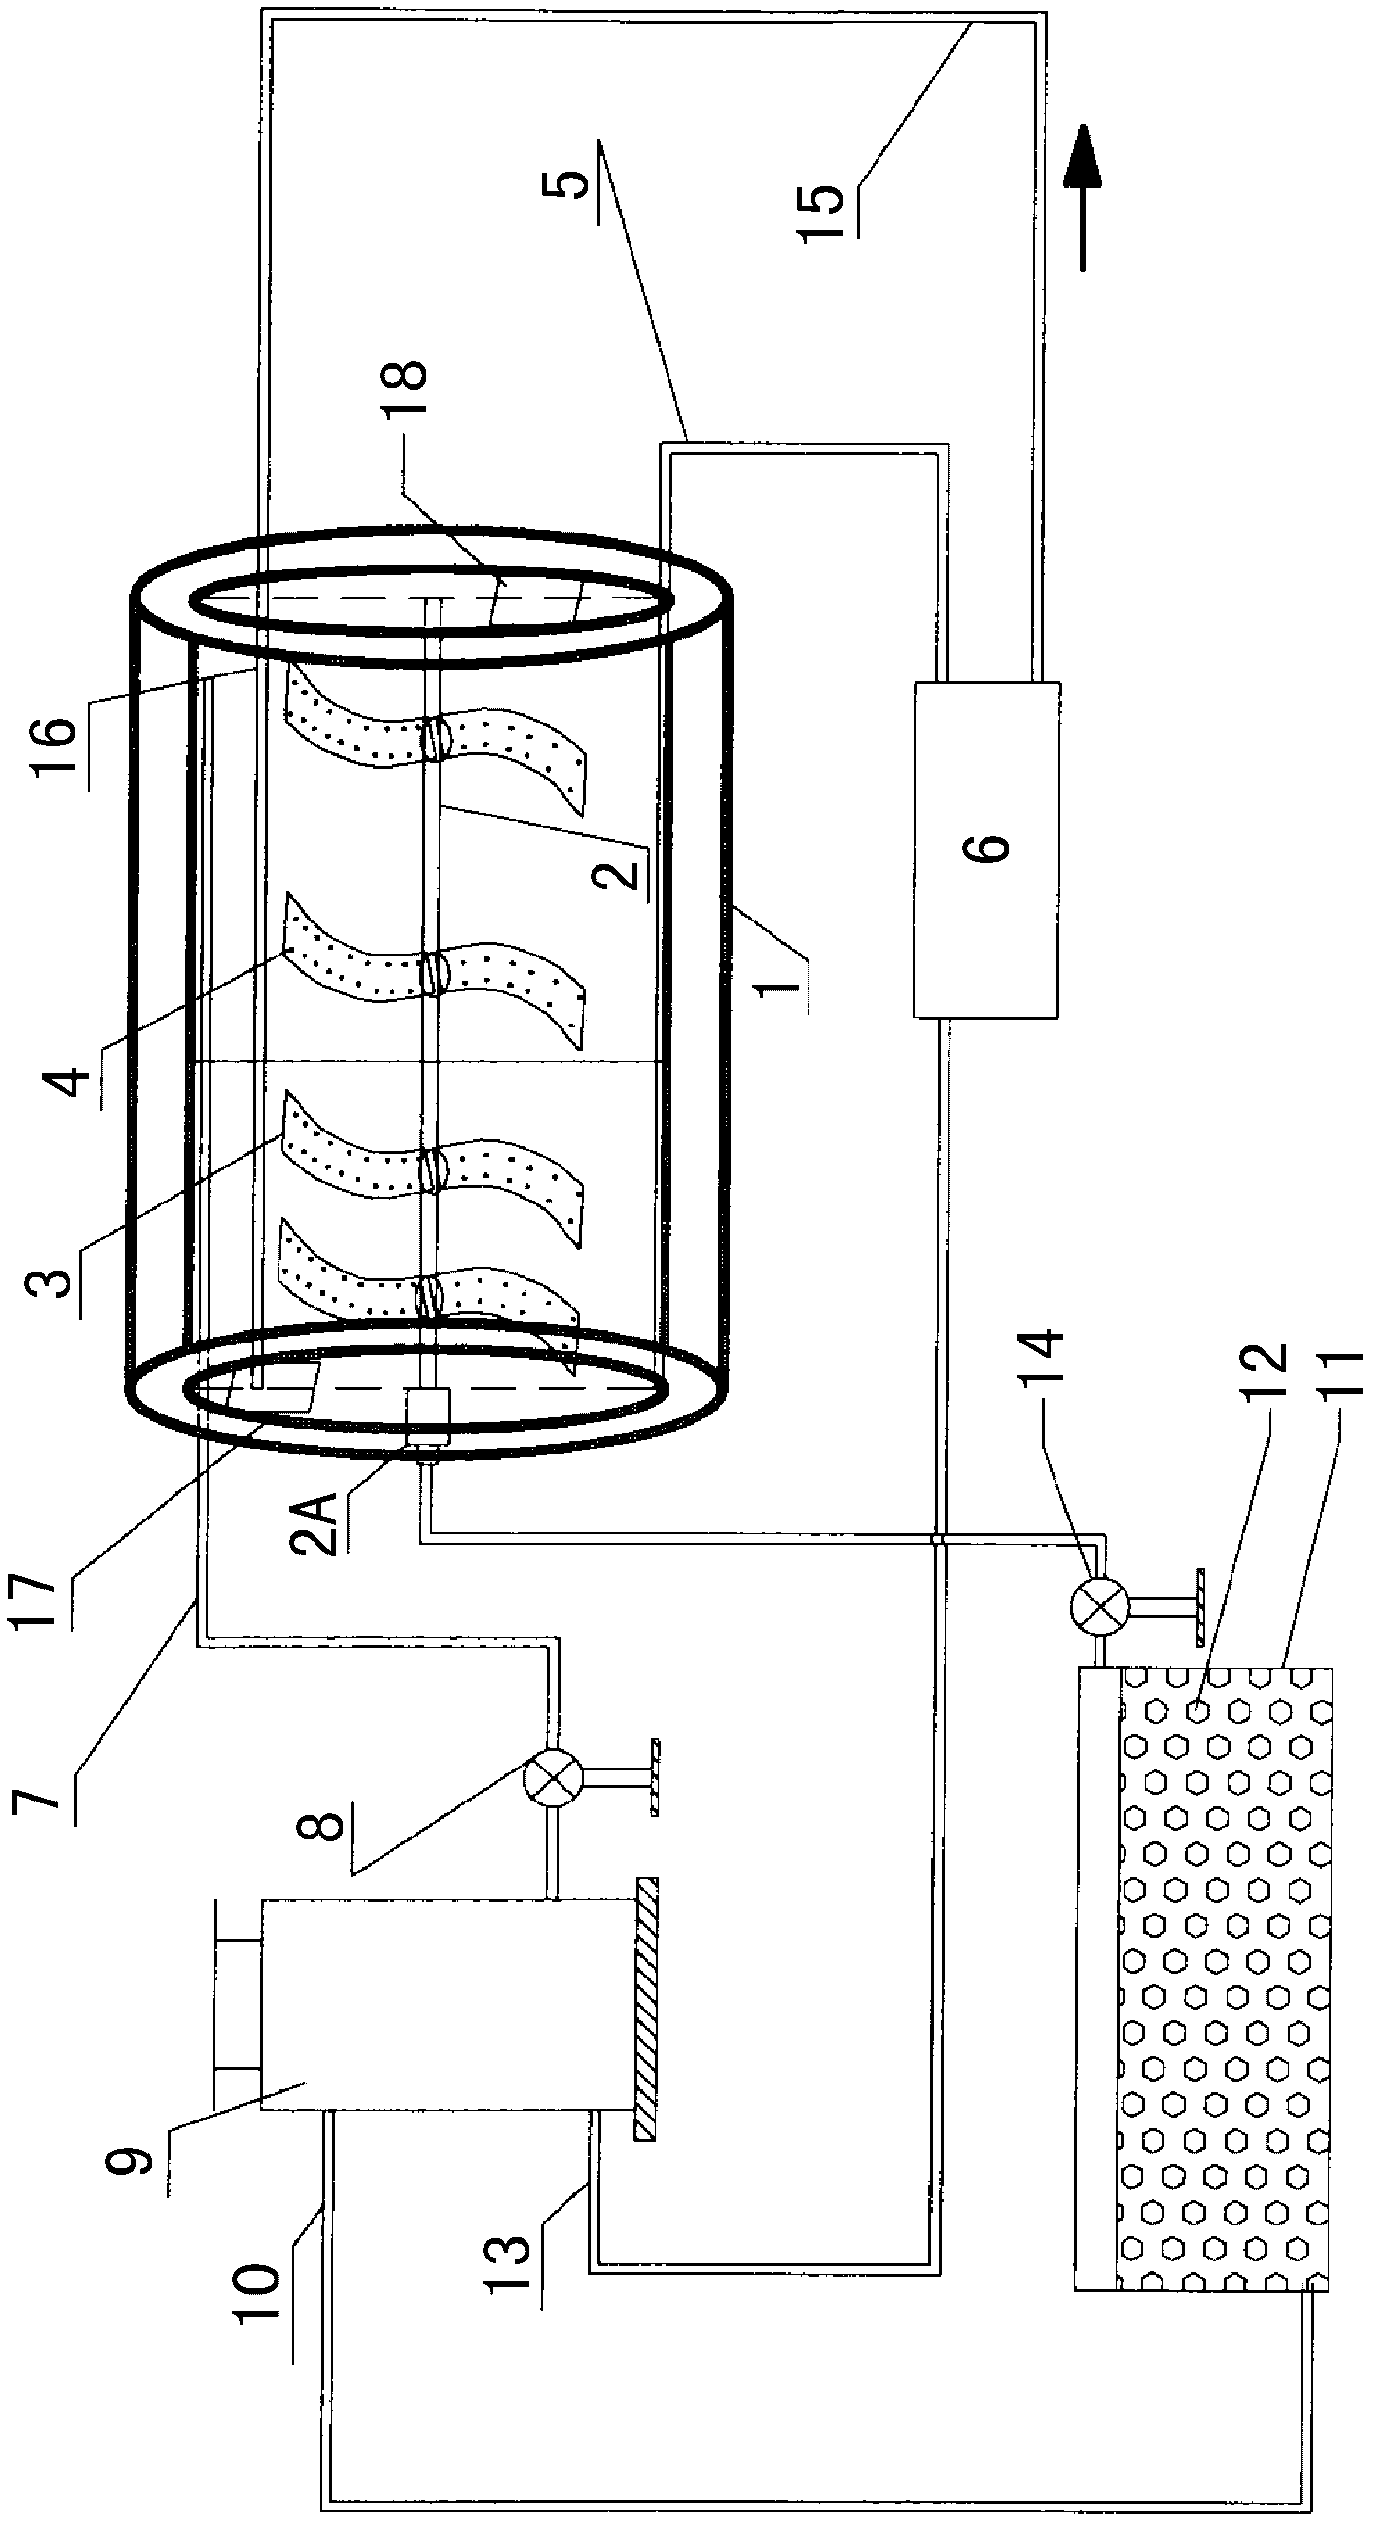 Countryside solid waste aerobic fermentation integration device